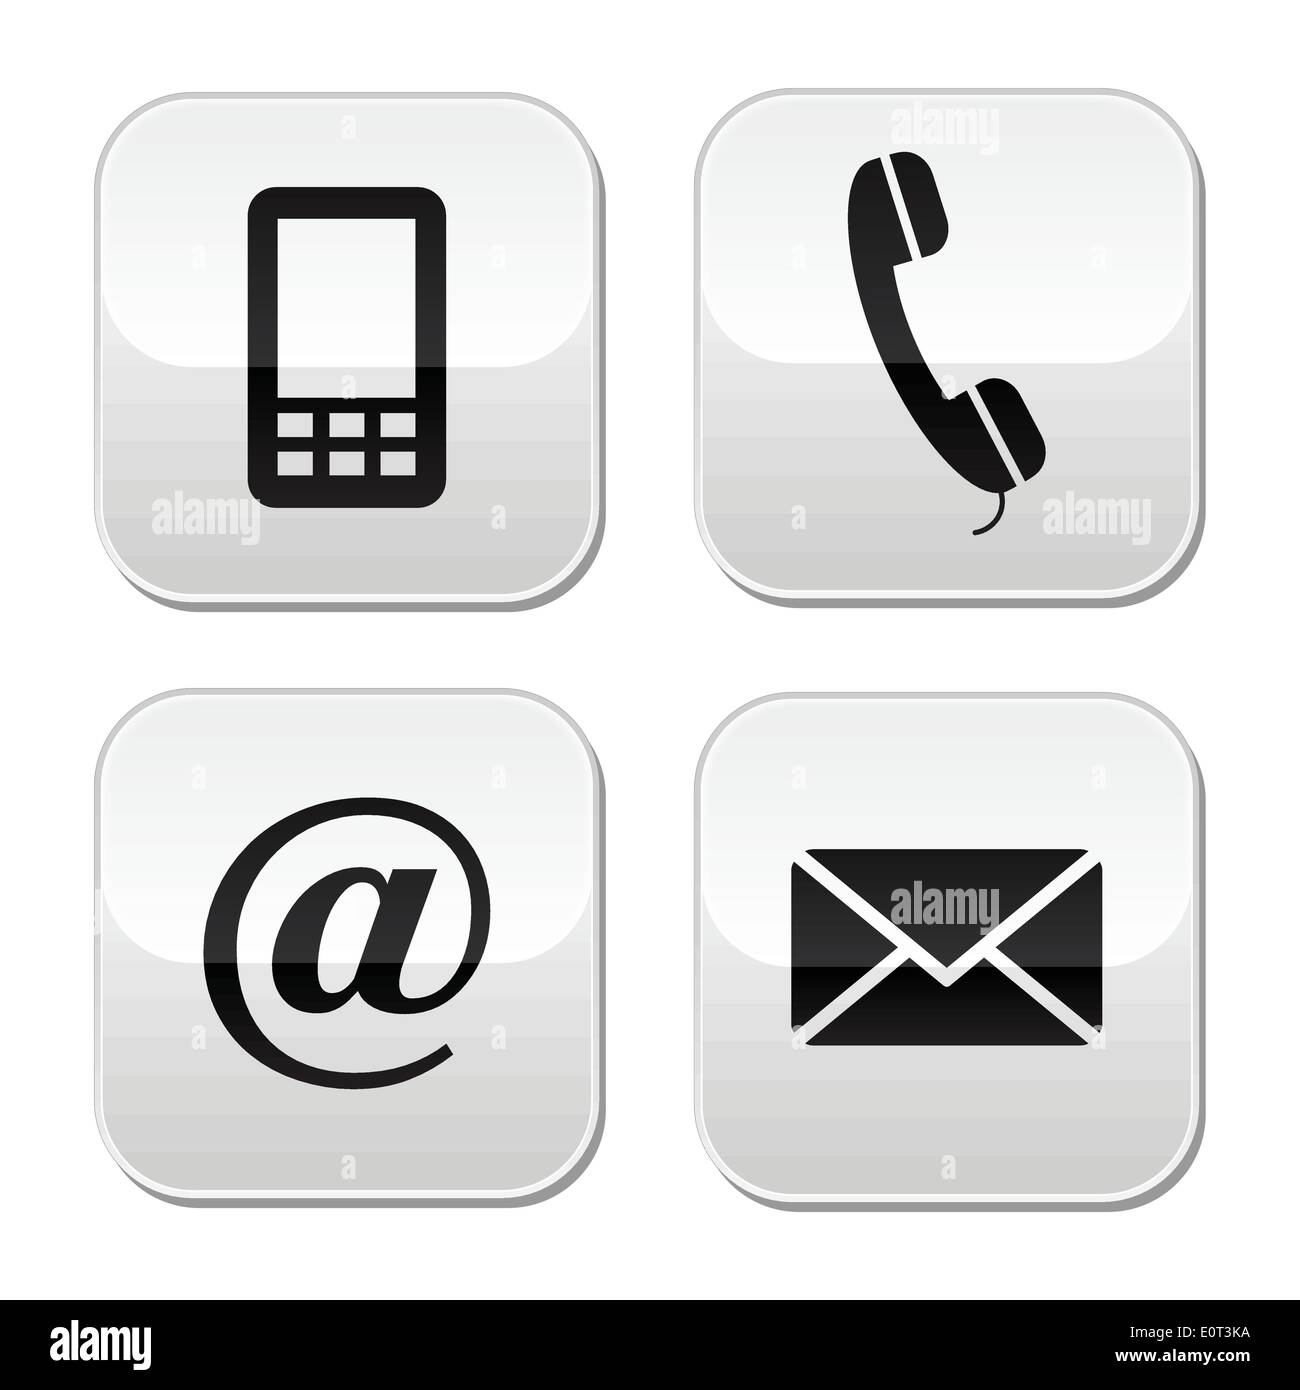 Contact web and internet icons set Stock Vector